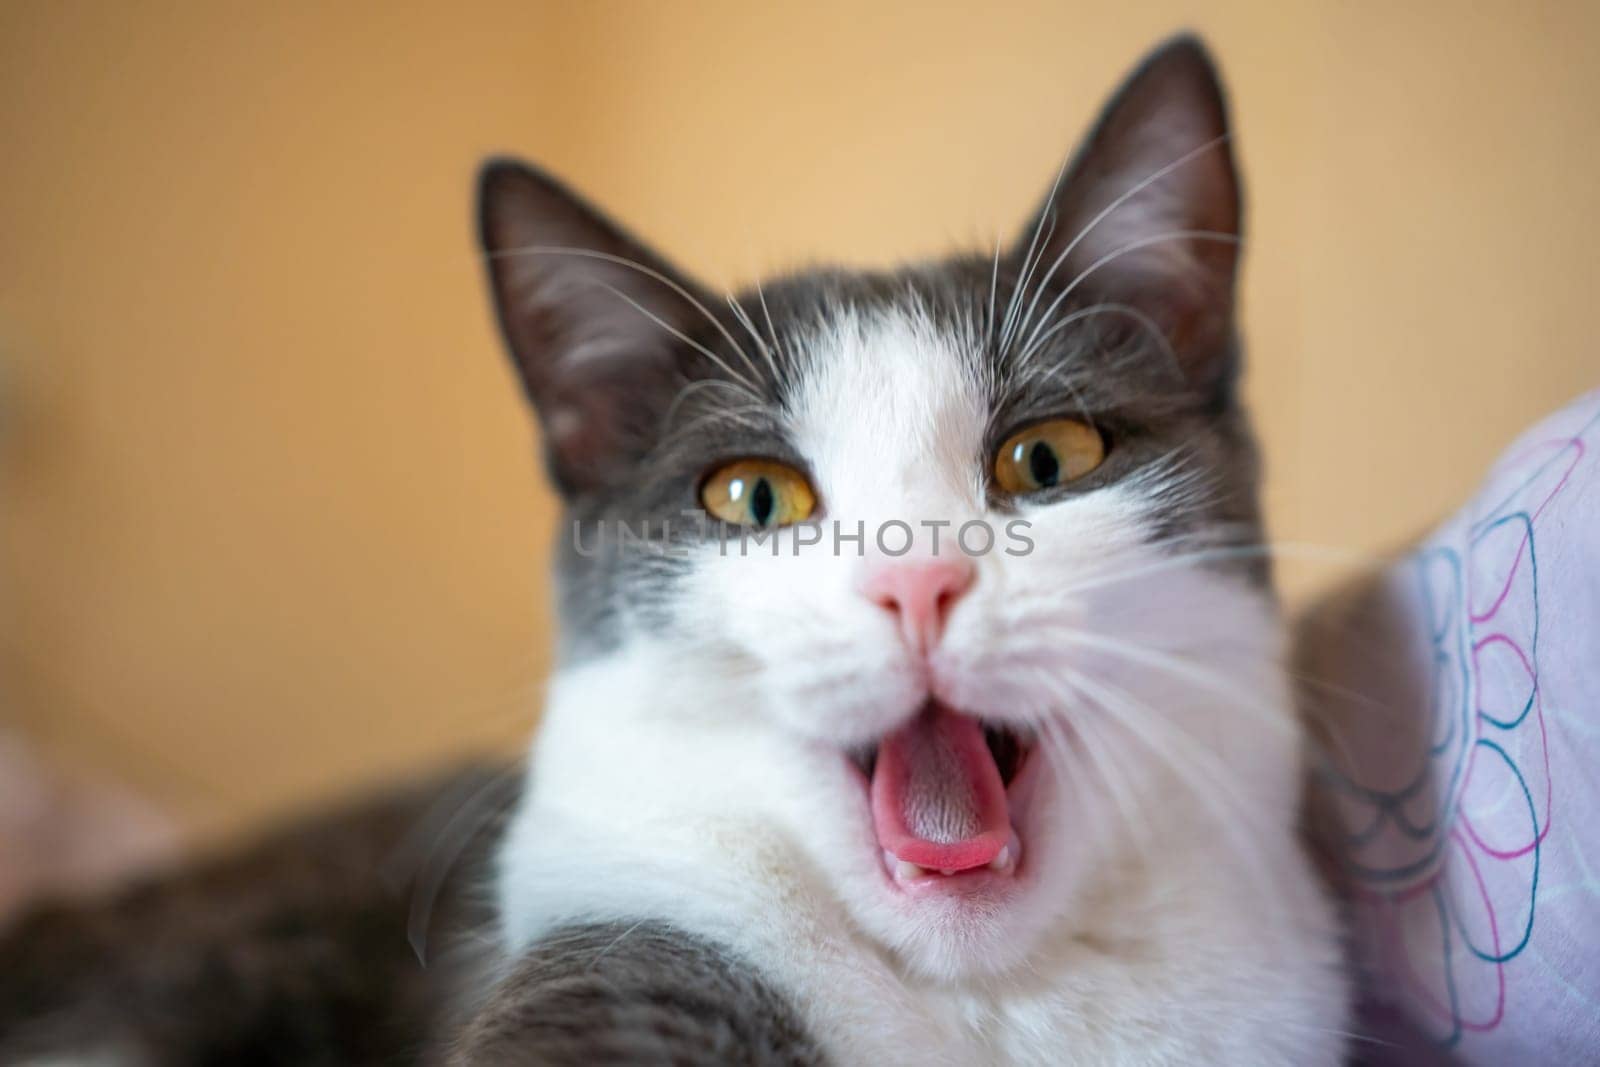 A cat is yawning and has its mouth open. The cat is on a bed and is looking at the camera